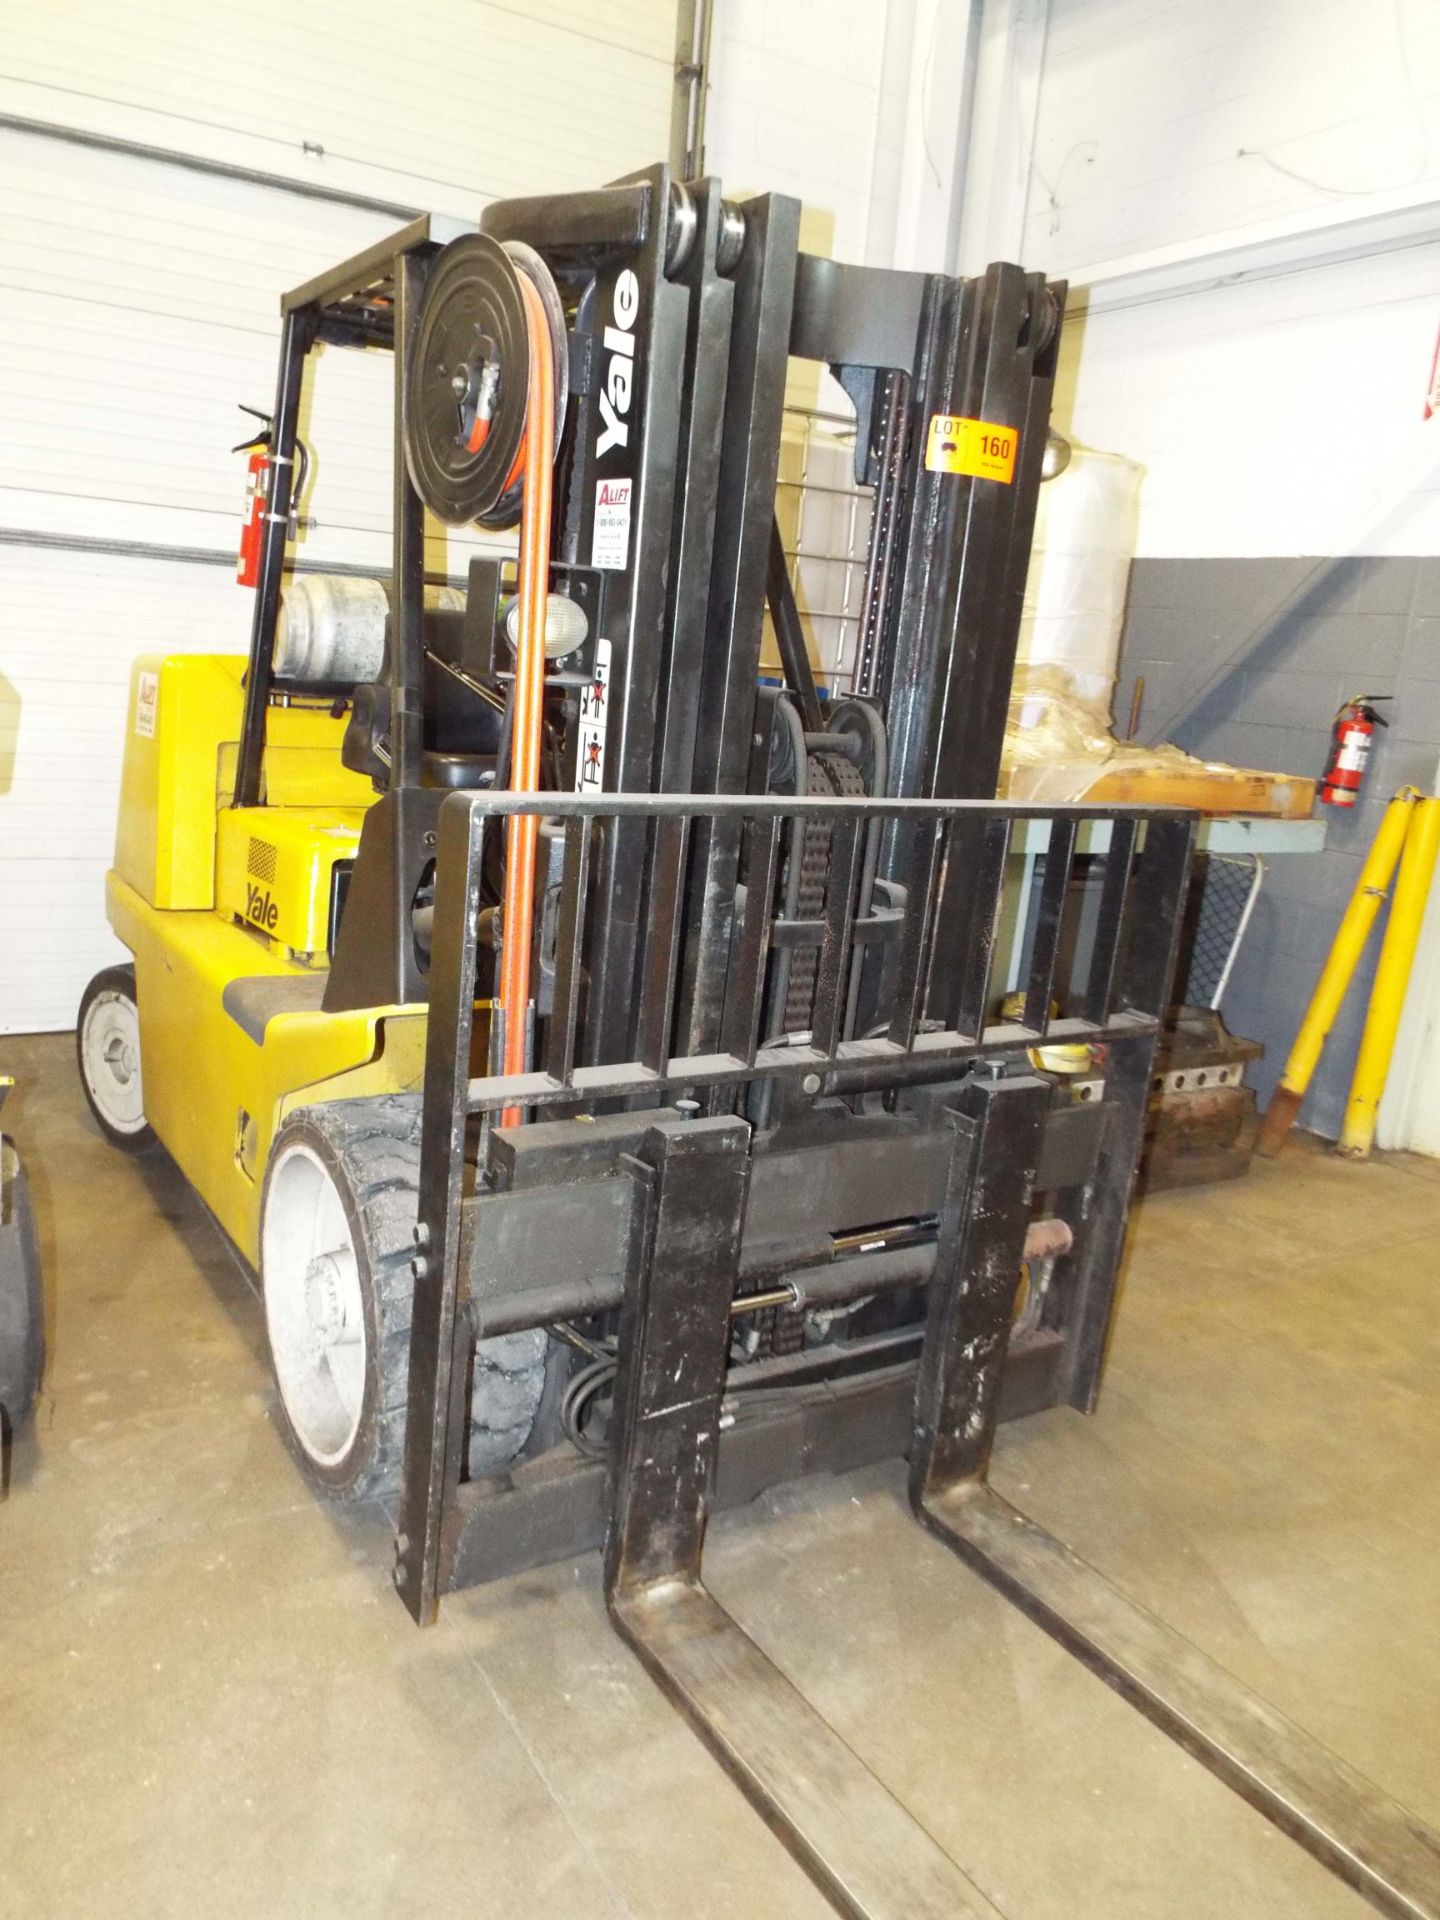 YALE GC155CANGBQ095 15,000 LBS. CAPACITY LPG FORKLIFT WITH 181" MAX VERTICAL REACH, 3-STAGE MAST,